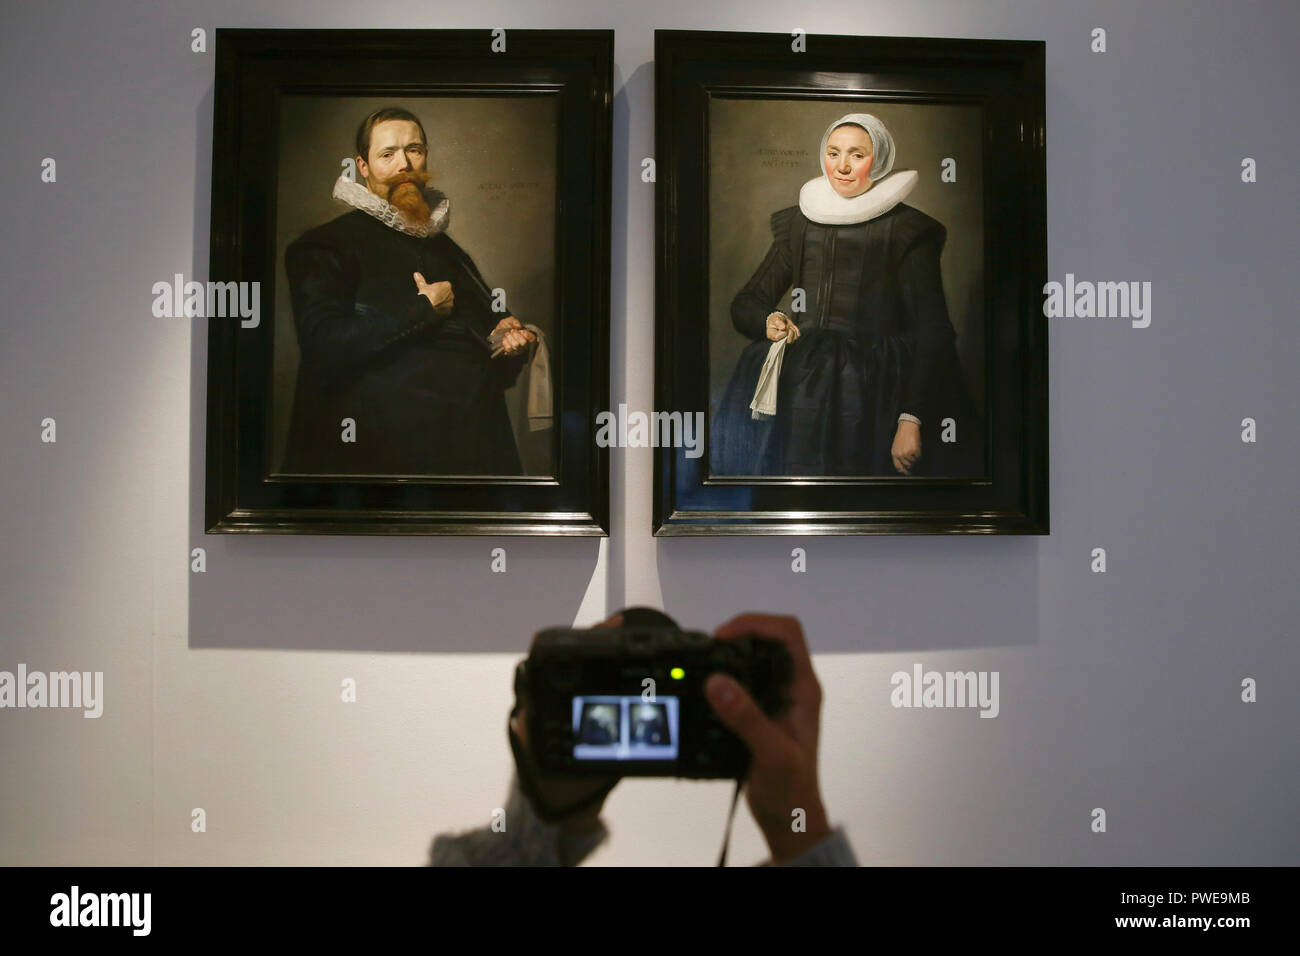 London, UK, 16th Oct 2018. A photographer captures Dutch master Frans Hals 's works 'Portrait of a Gentleman holding a pair of gloves' and ' Portrait of a lady holding a handkerchief' at Christie's AuctionHouse in London, UK, Tuesday October 16, 2017. The pair is expected to achieve up to £12million when they come to auction as part of the Albada Jelgersma Collection sale during Christie's Classic Week in December. Photograph : Credit: Luke MacGregor/Alamy Live News Stock Photo